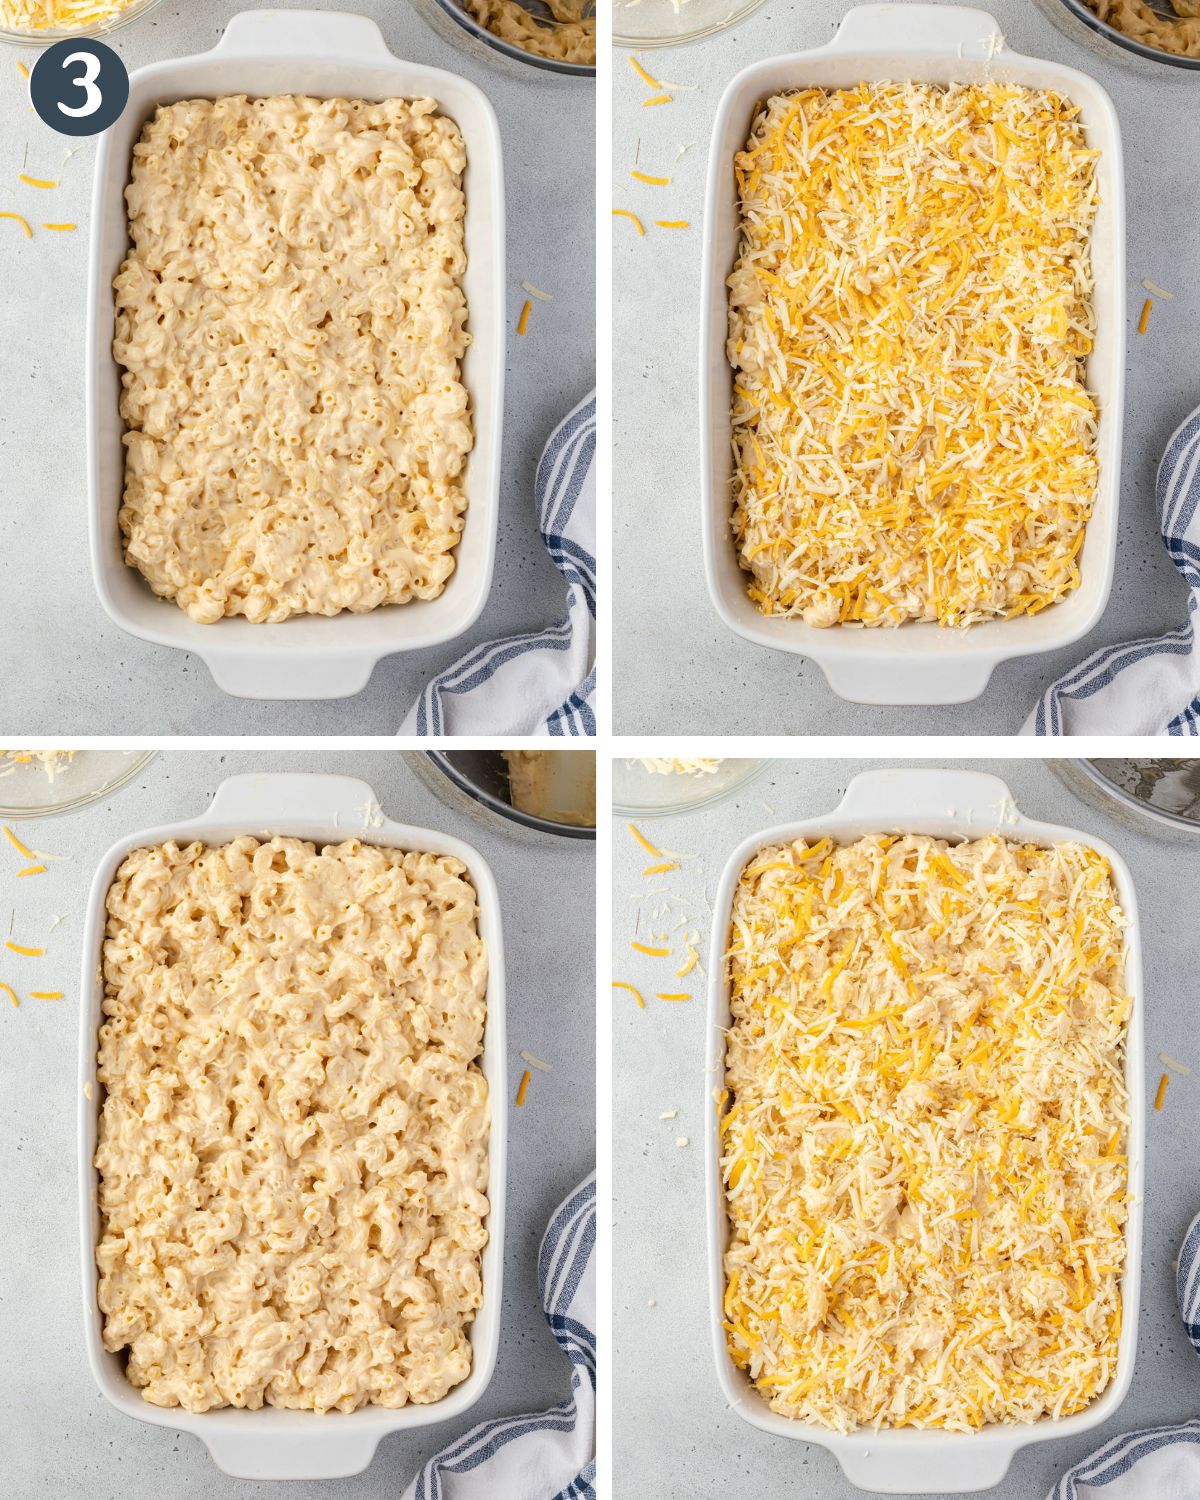 4 images showing the 4 layers of macaroni and cheese in the pan.